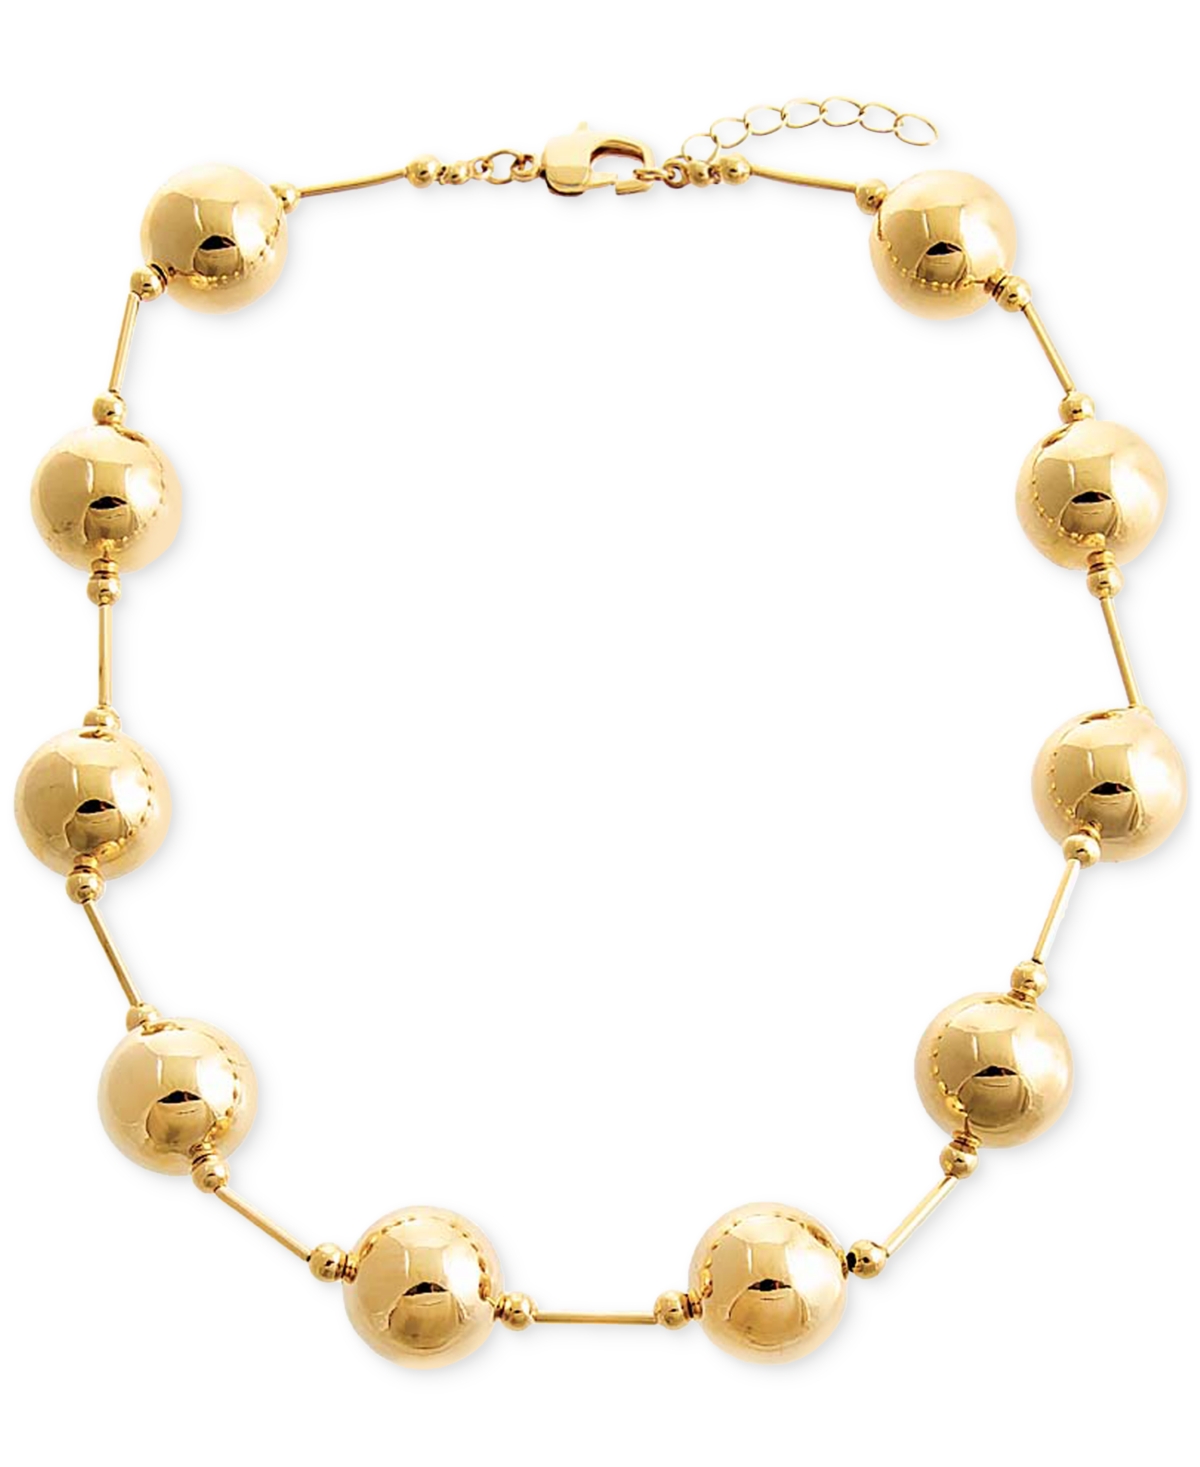 By Adina Eden 14k Gold-plated Large Ball & Bar Collar Necklace, 15" + 1-1/2" Extender